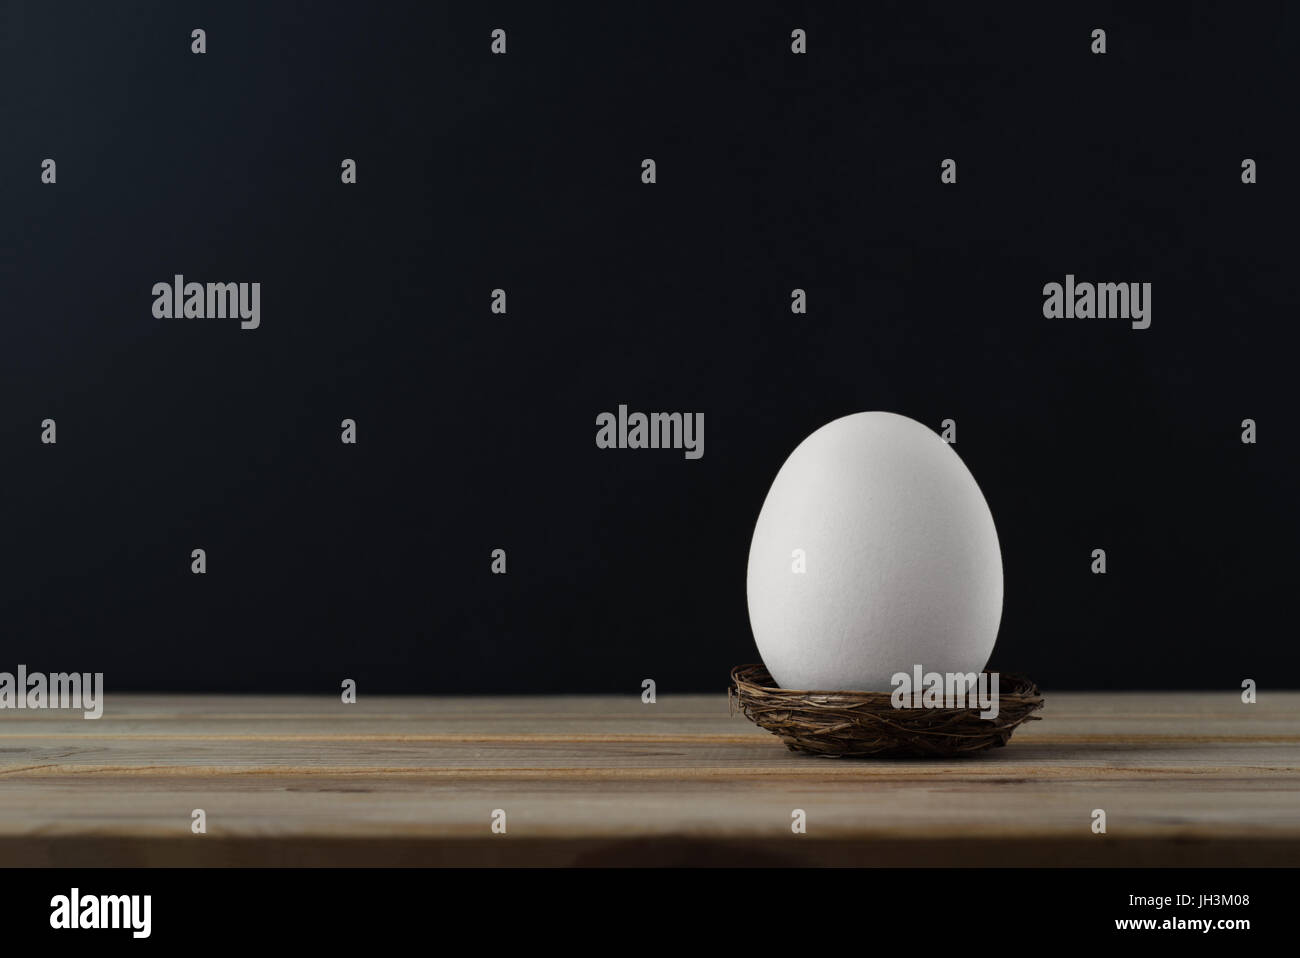 An upright chicken's egg (whitened) in small nest on wood plank table.  Black chalkboard background provides copy space. Stock Photo